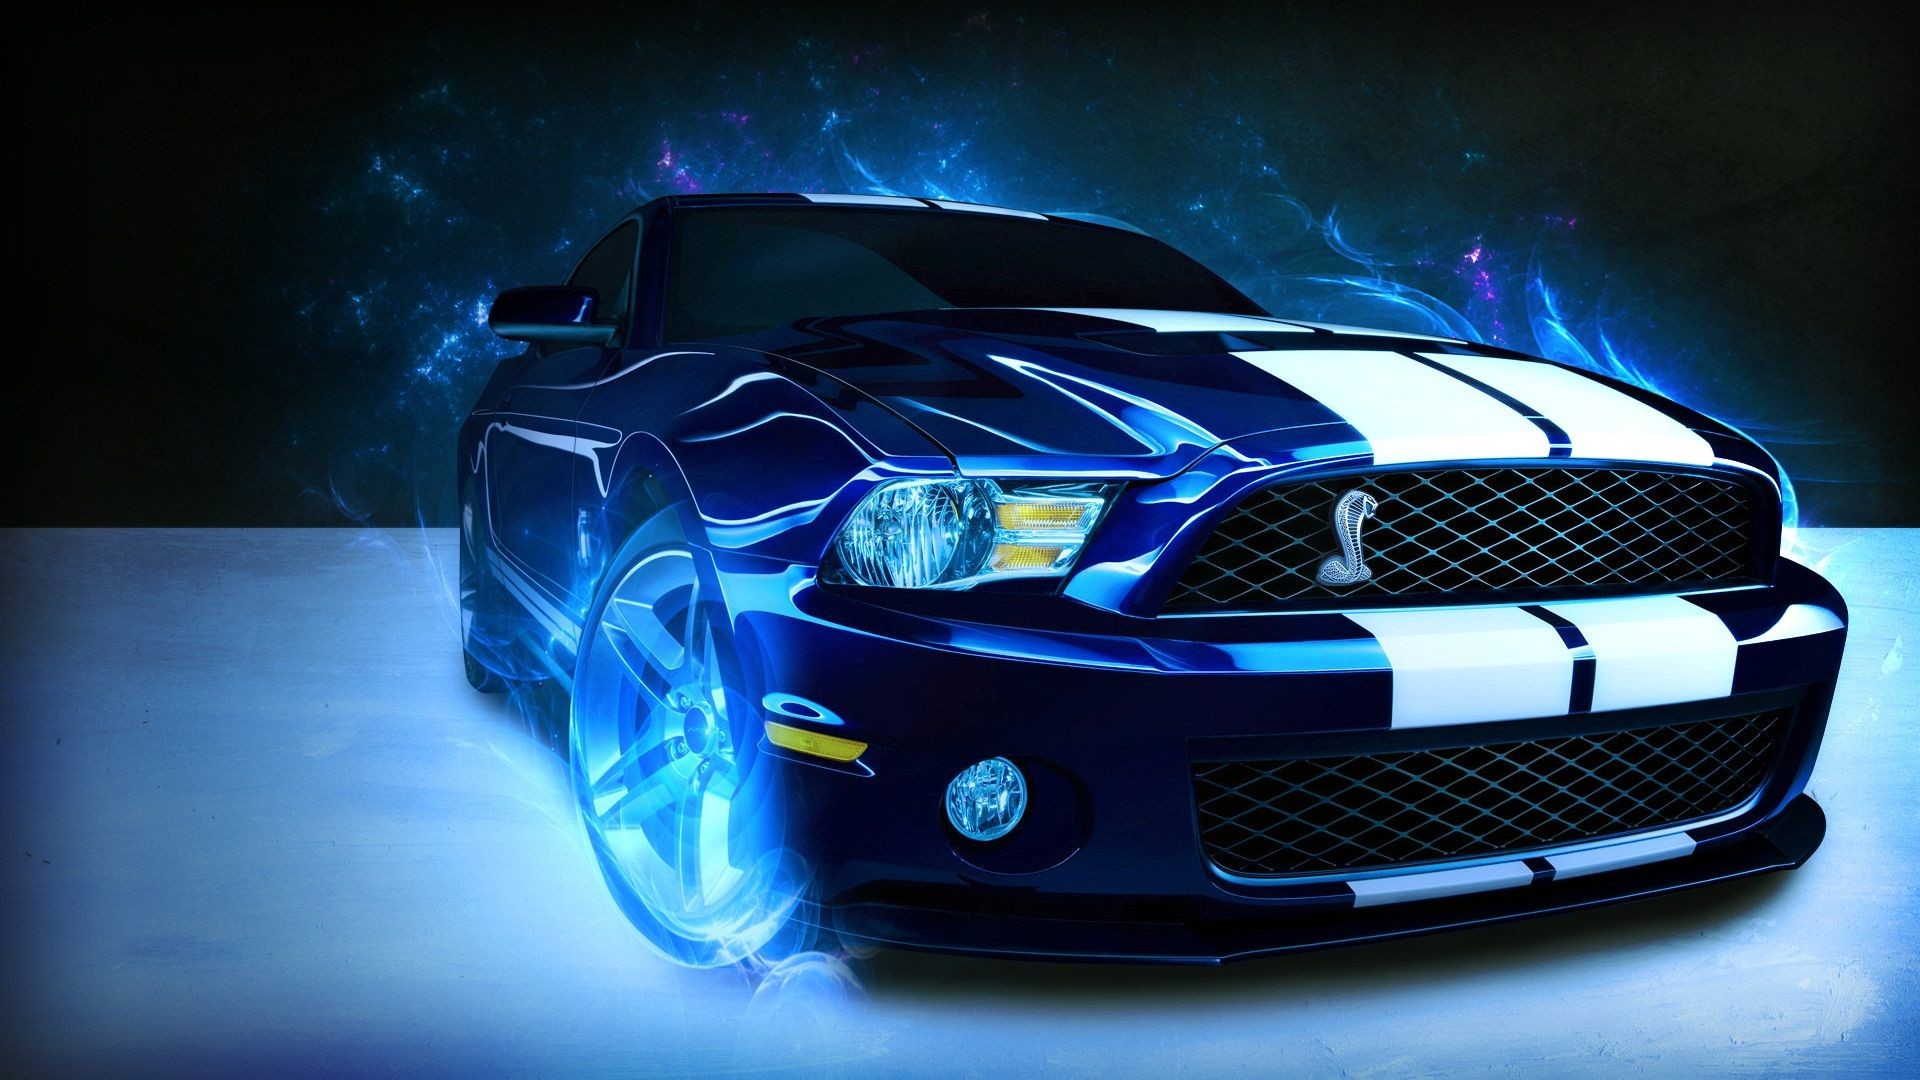 1920x1080 Luxury SUV Ford Mustang Hd Wallpapers For Desktop Speed Test